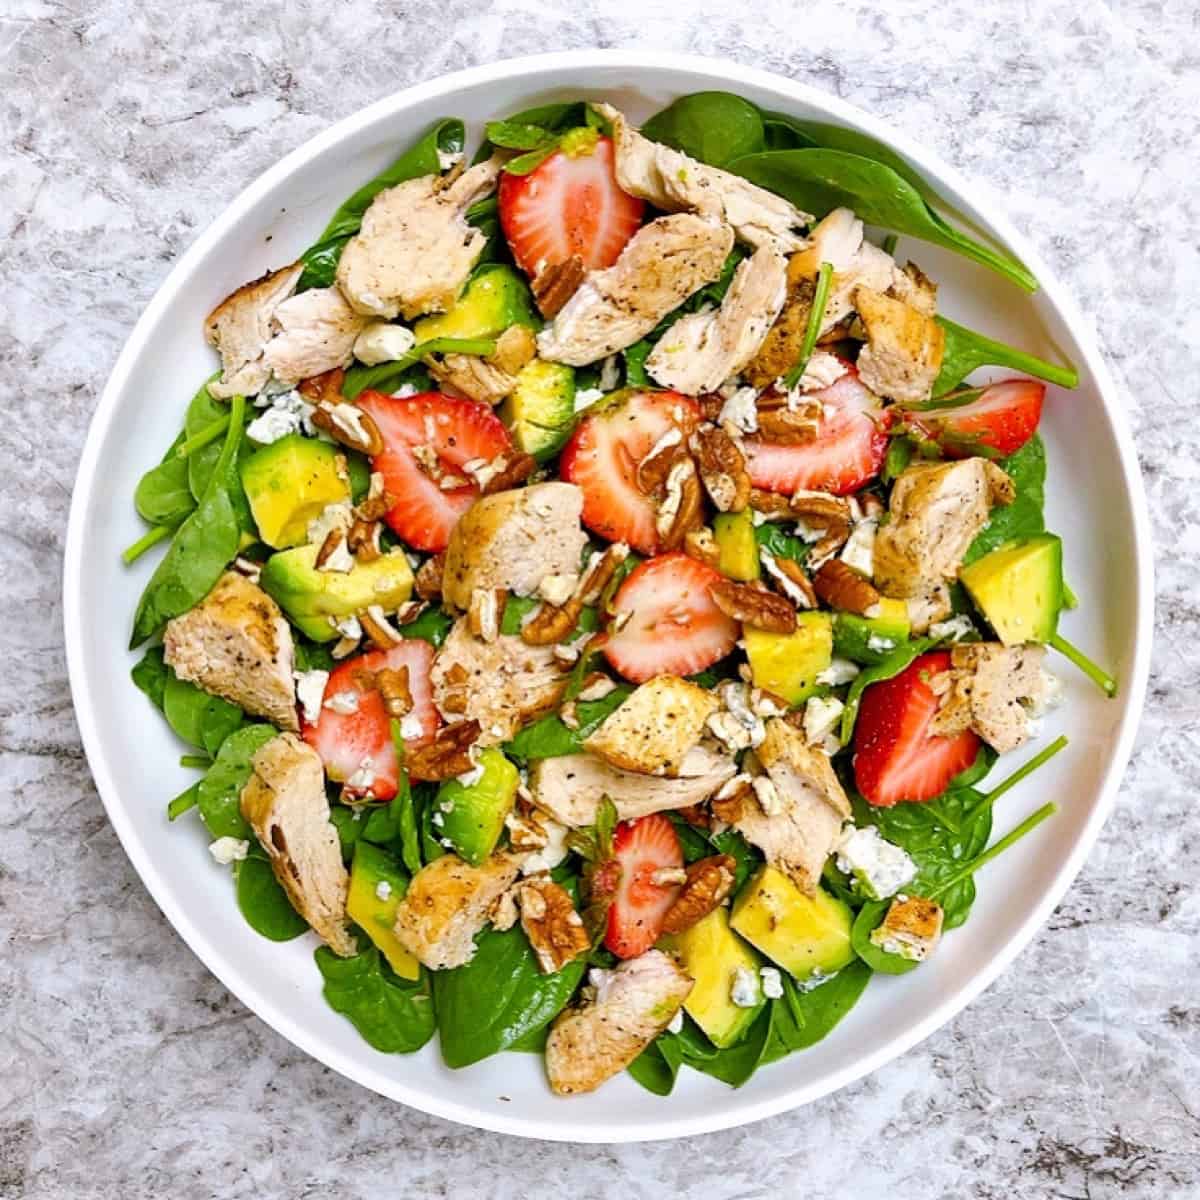 Large white bowl of strawberry spinach salad with avocado and pecans